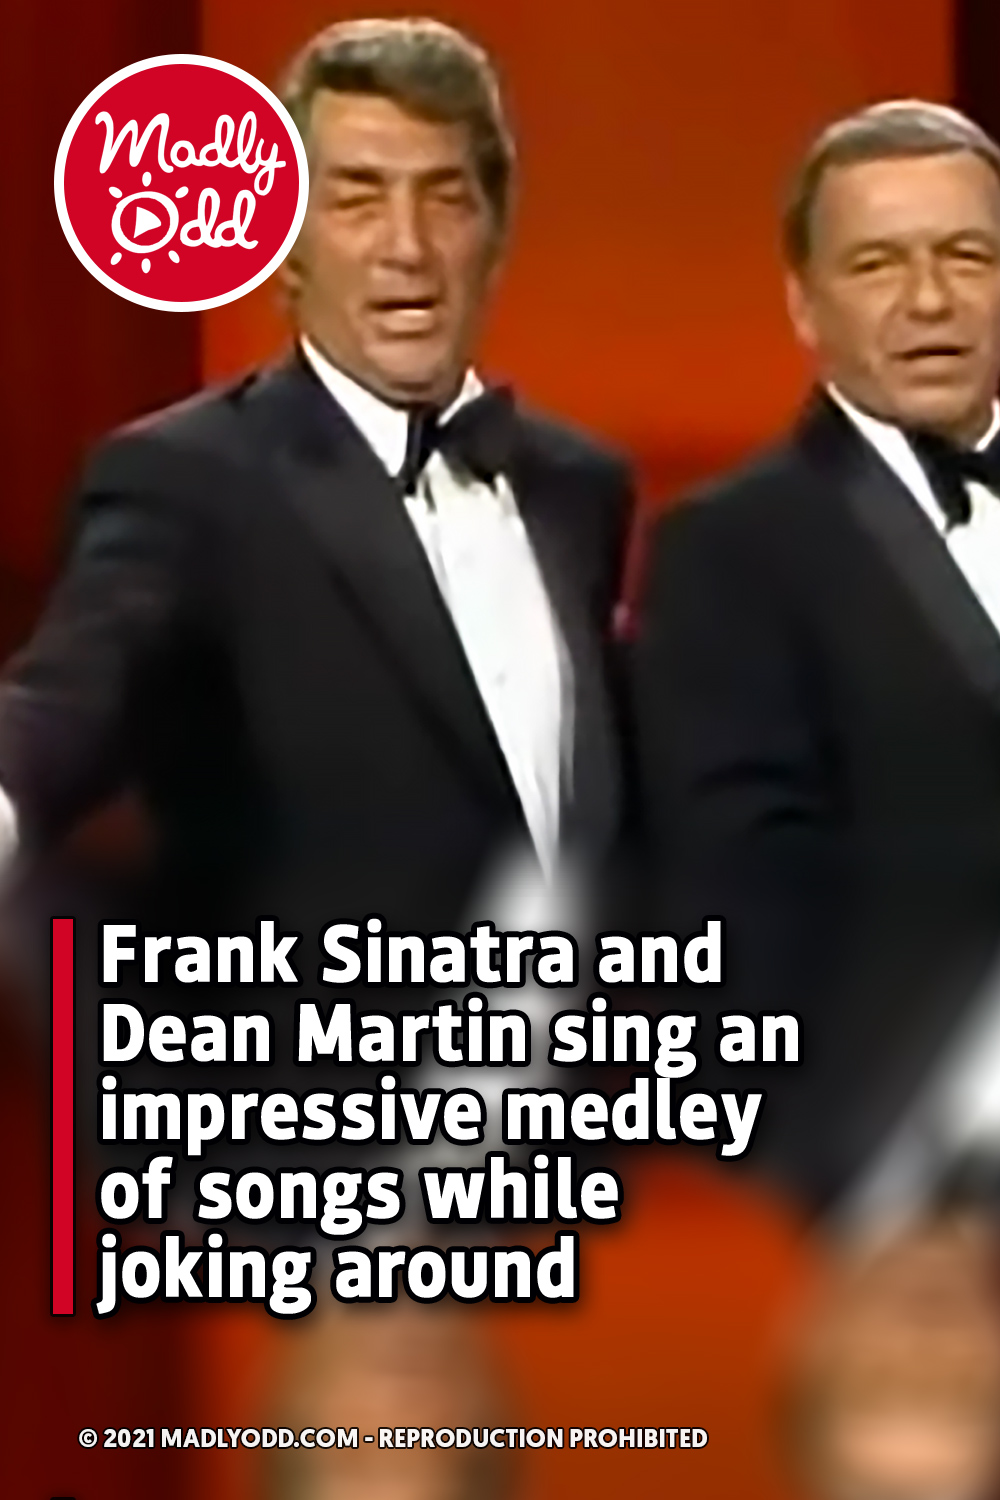 Frank Sinatra and Dean Martin sing an impressive medley of songs while joking around